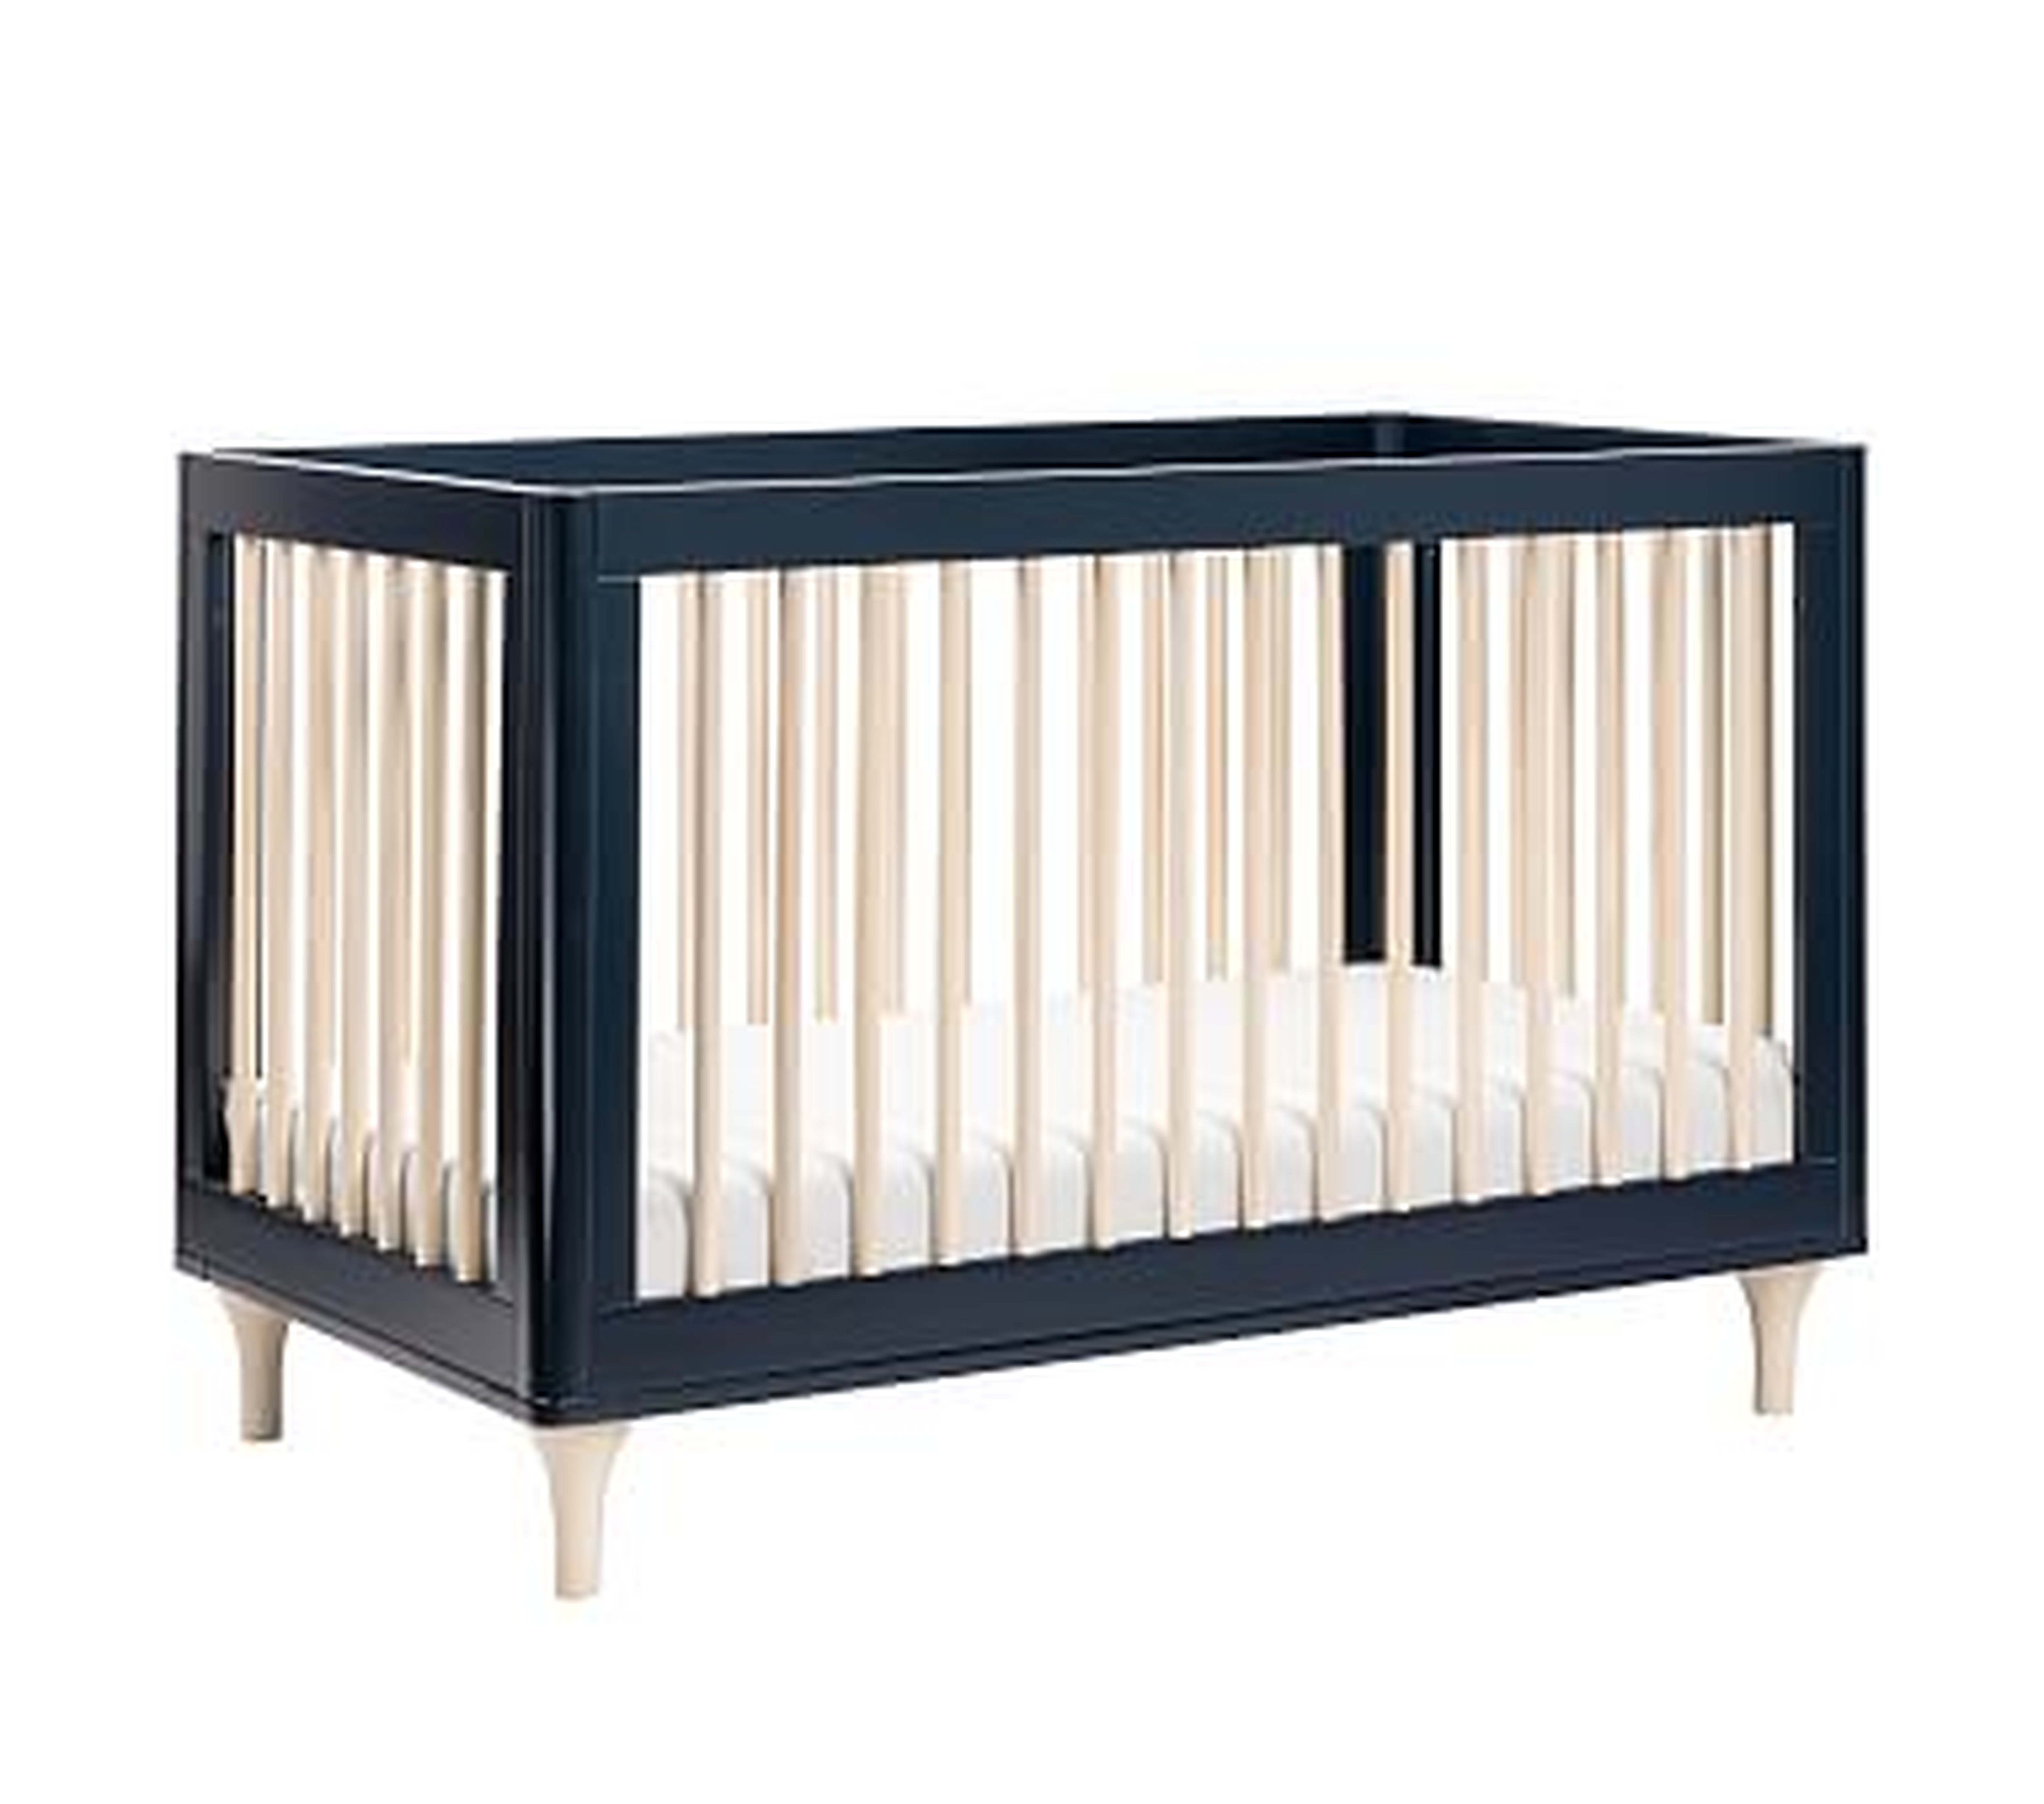 Babyletto Lolly Convertible Crib, Navy/Washed Natural - Pottery Barn Kids